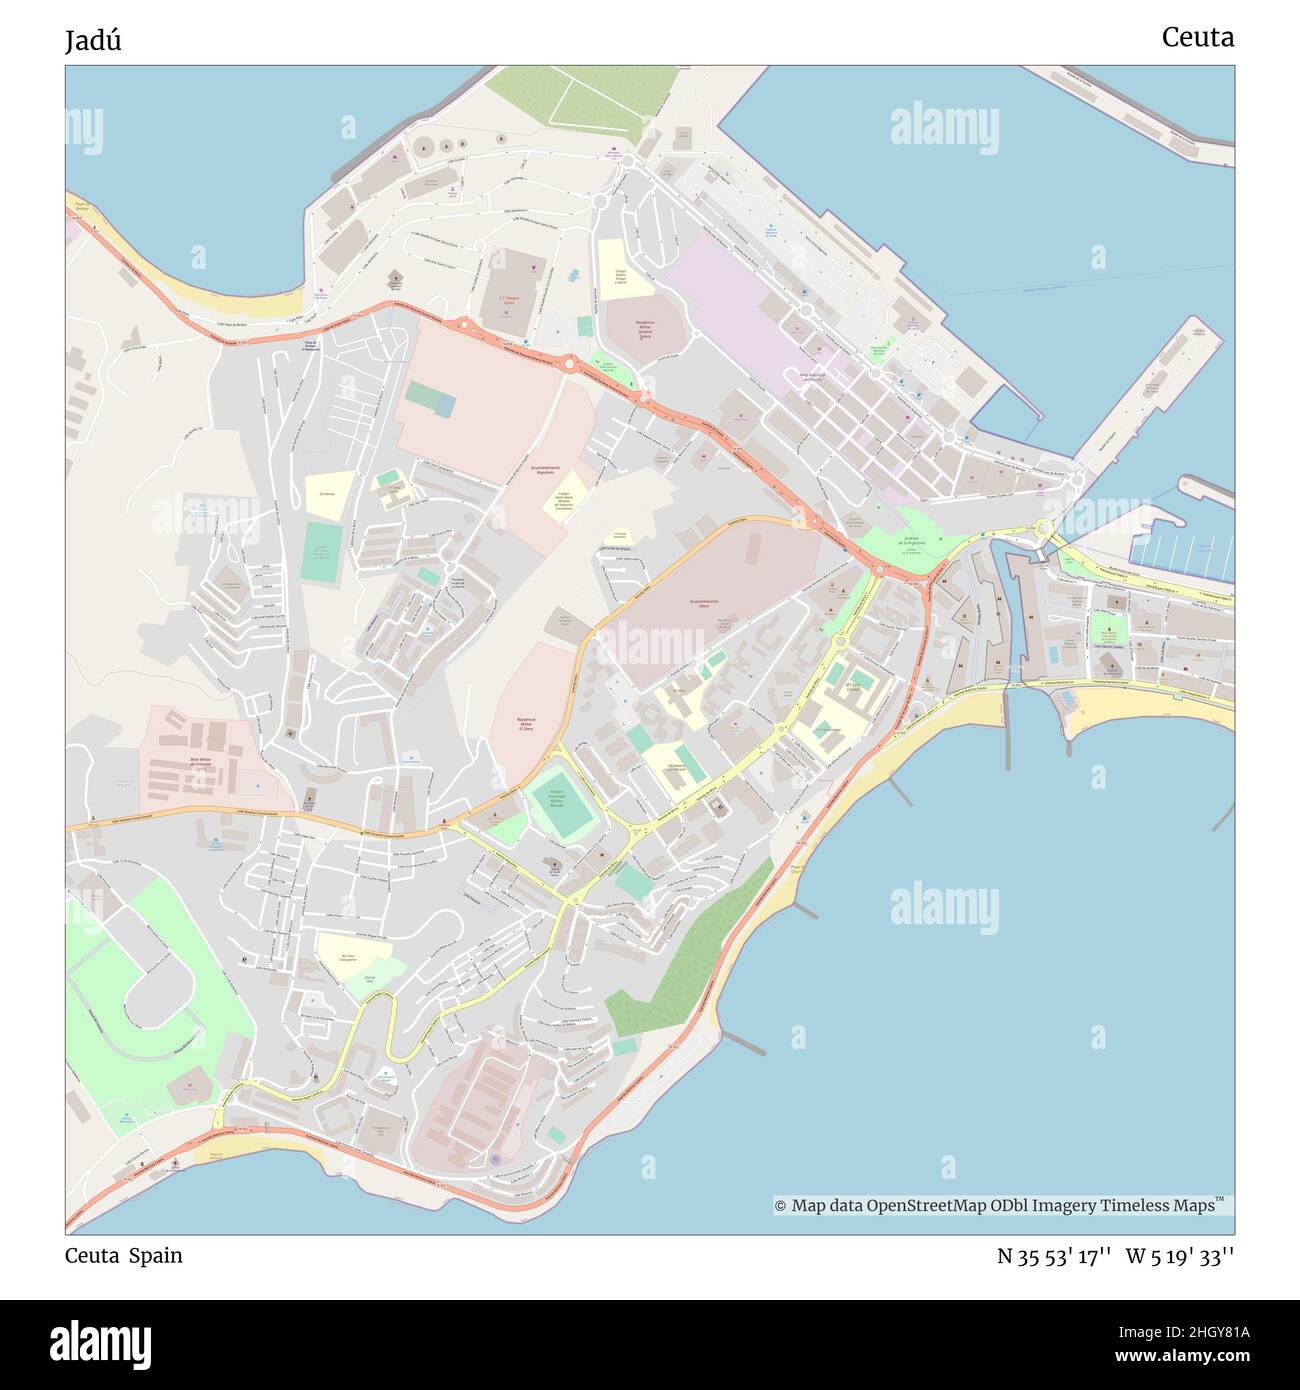 Jadú, Ceuta, Spain, Ceuta, N 35 53' 17'', W 5 19' 33'', map, Timeless Map published in 2021. Travelers, explorers and adventurers like Florence Nightingale, David Livingstone, Ernest Shackleton, Lewis and Clark and Sherlock Holmes relied on maps to plan travels to the world's most remote corners, Timeless Maps is mapping most locations on the globe, showing the achievement of great dreams Stock Photo